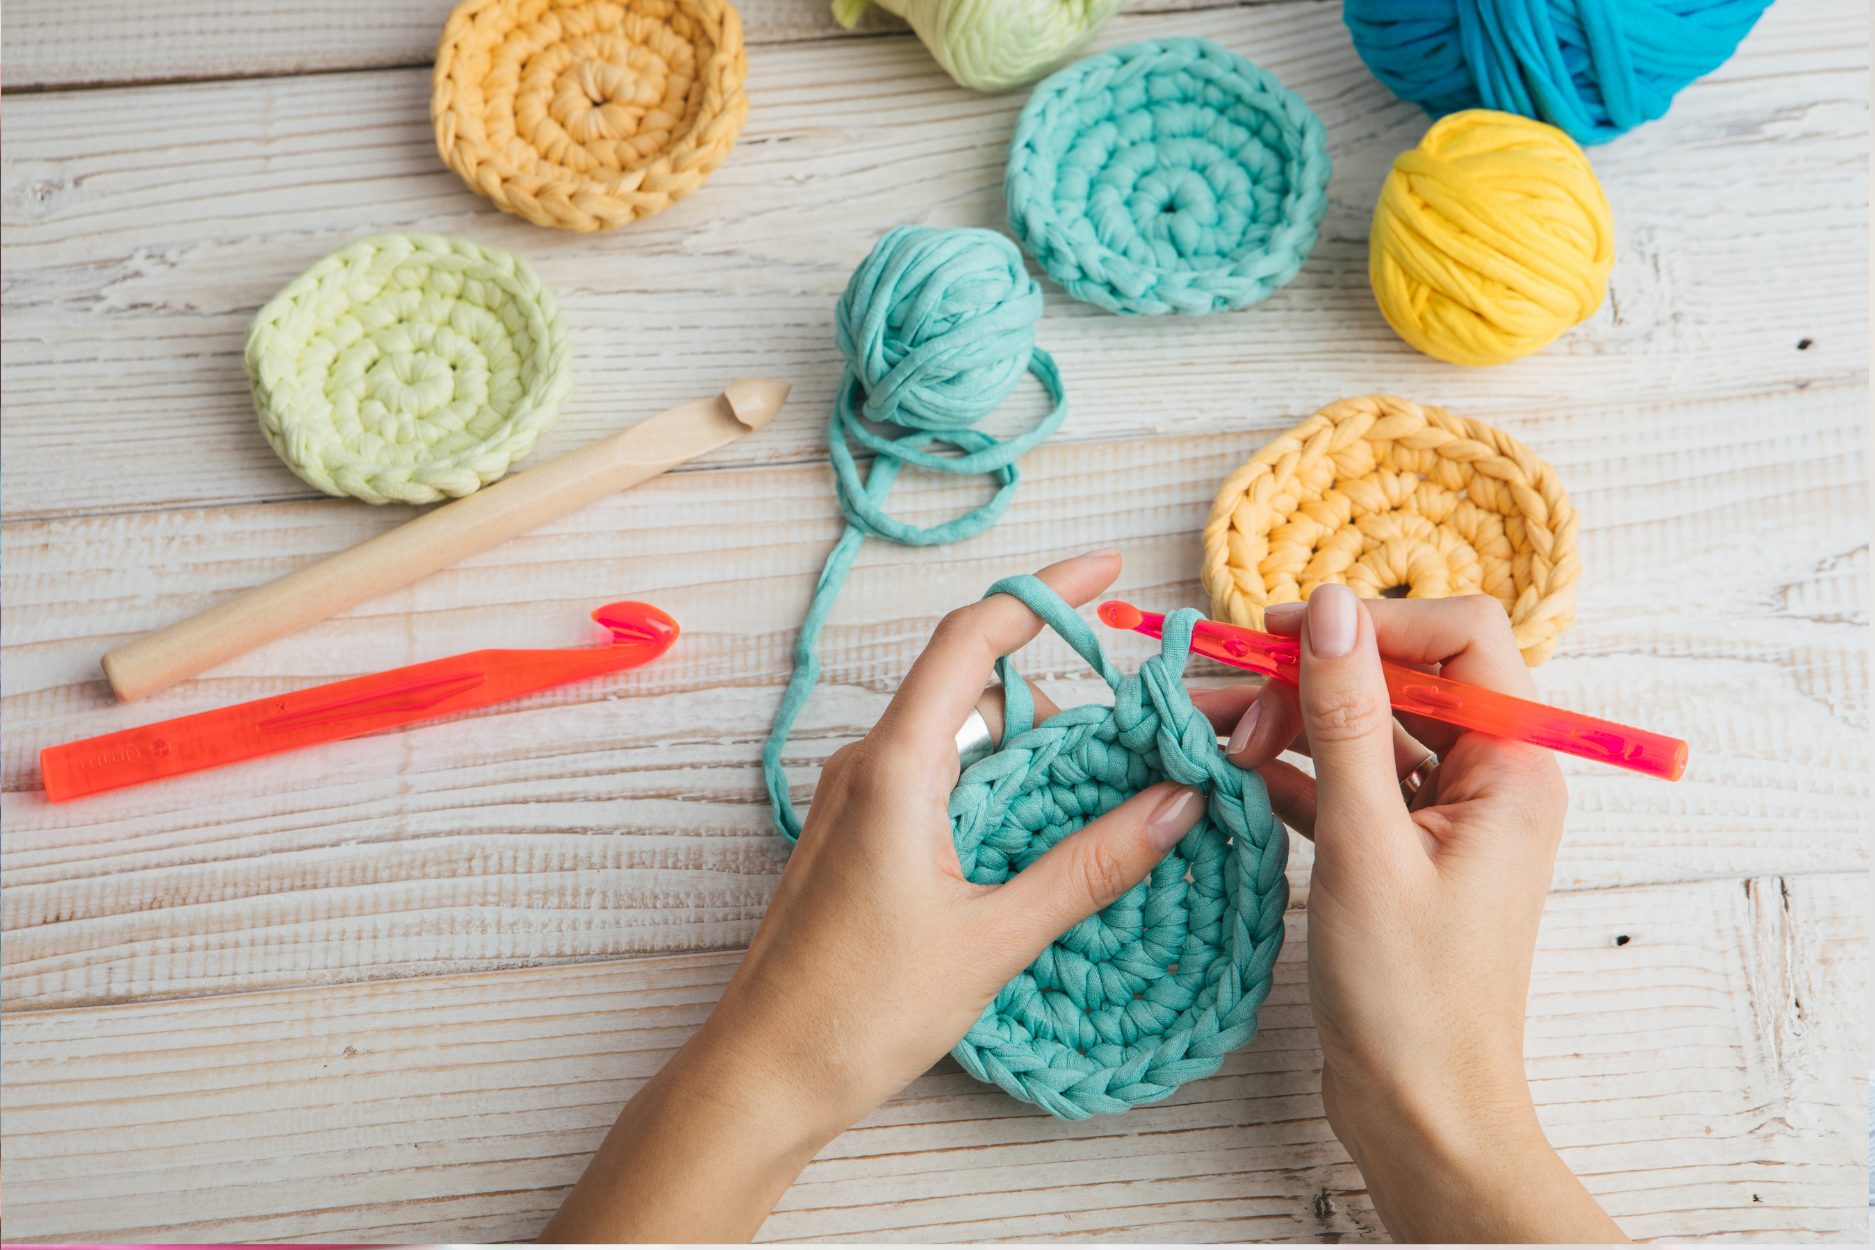 Why is My Crochet Curling? How to Fix Crochet Curling